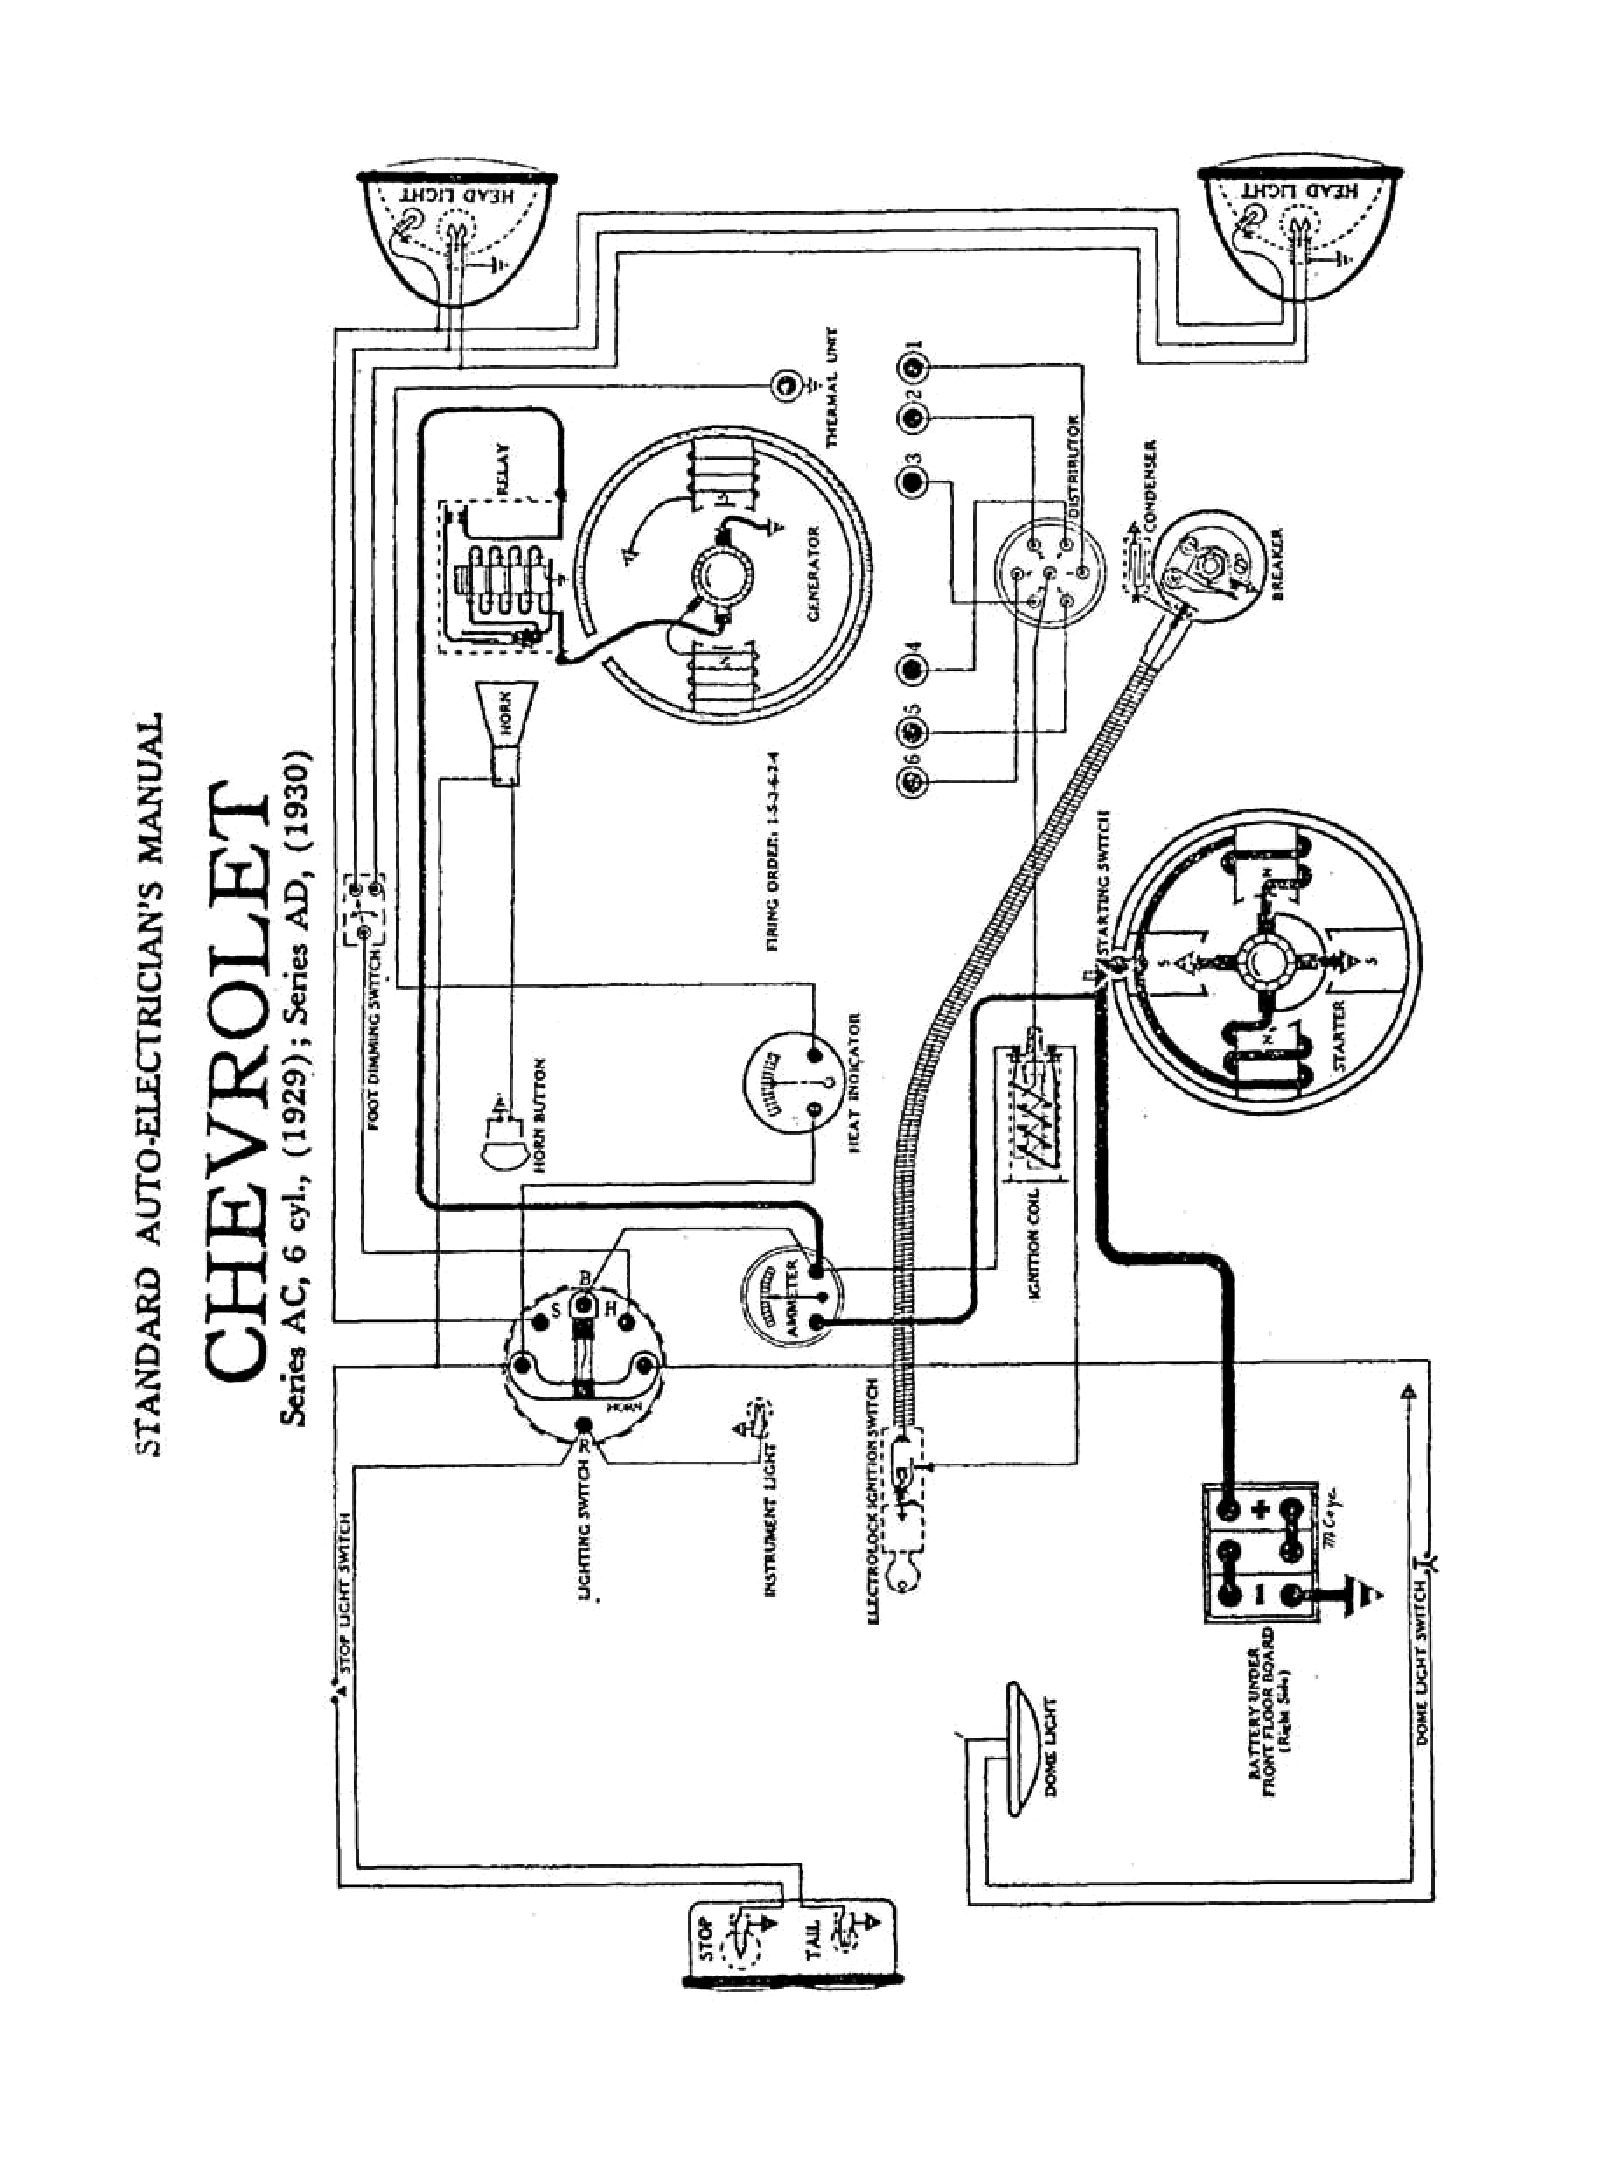 1930 Model A Ford Wiring Diagram from chevy.oldcarmanualproject.com